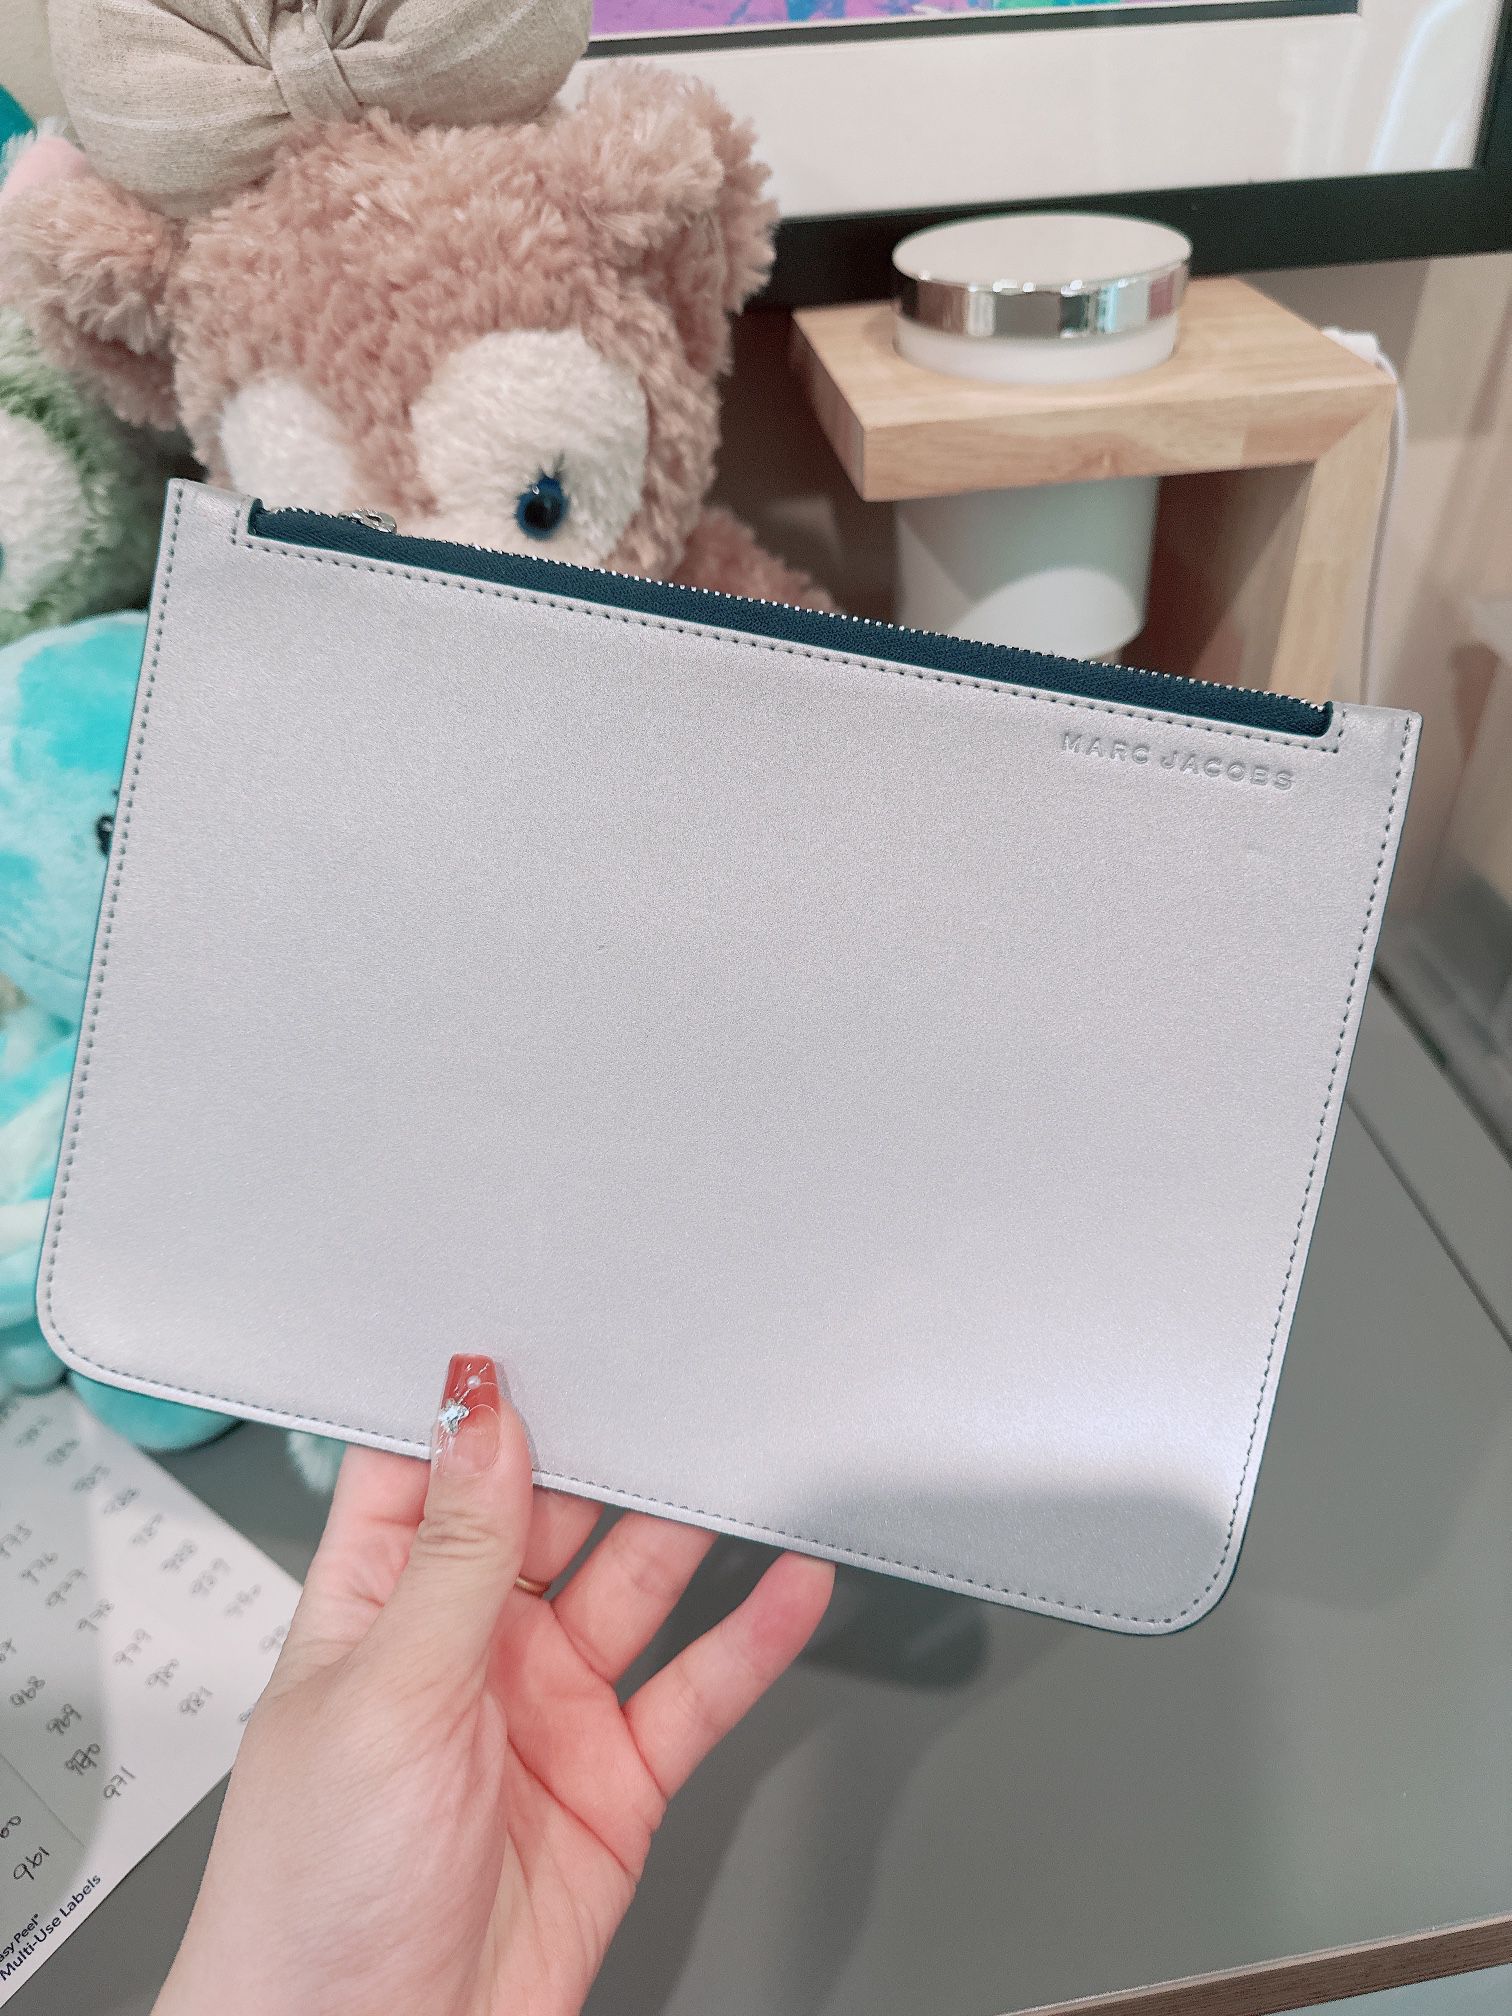 Marc jacobs silver pouch/NWOT